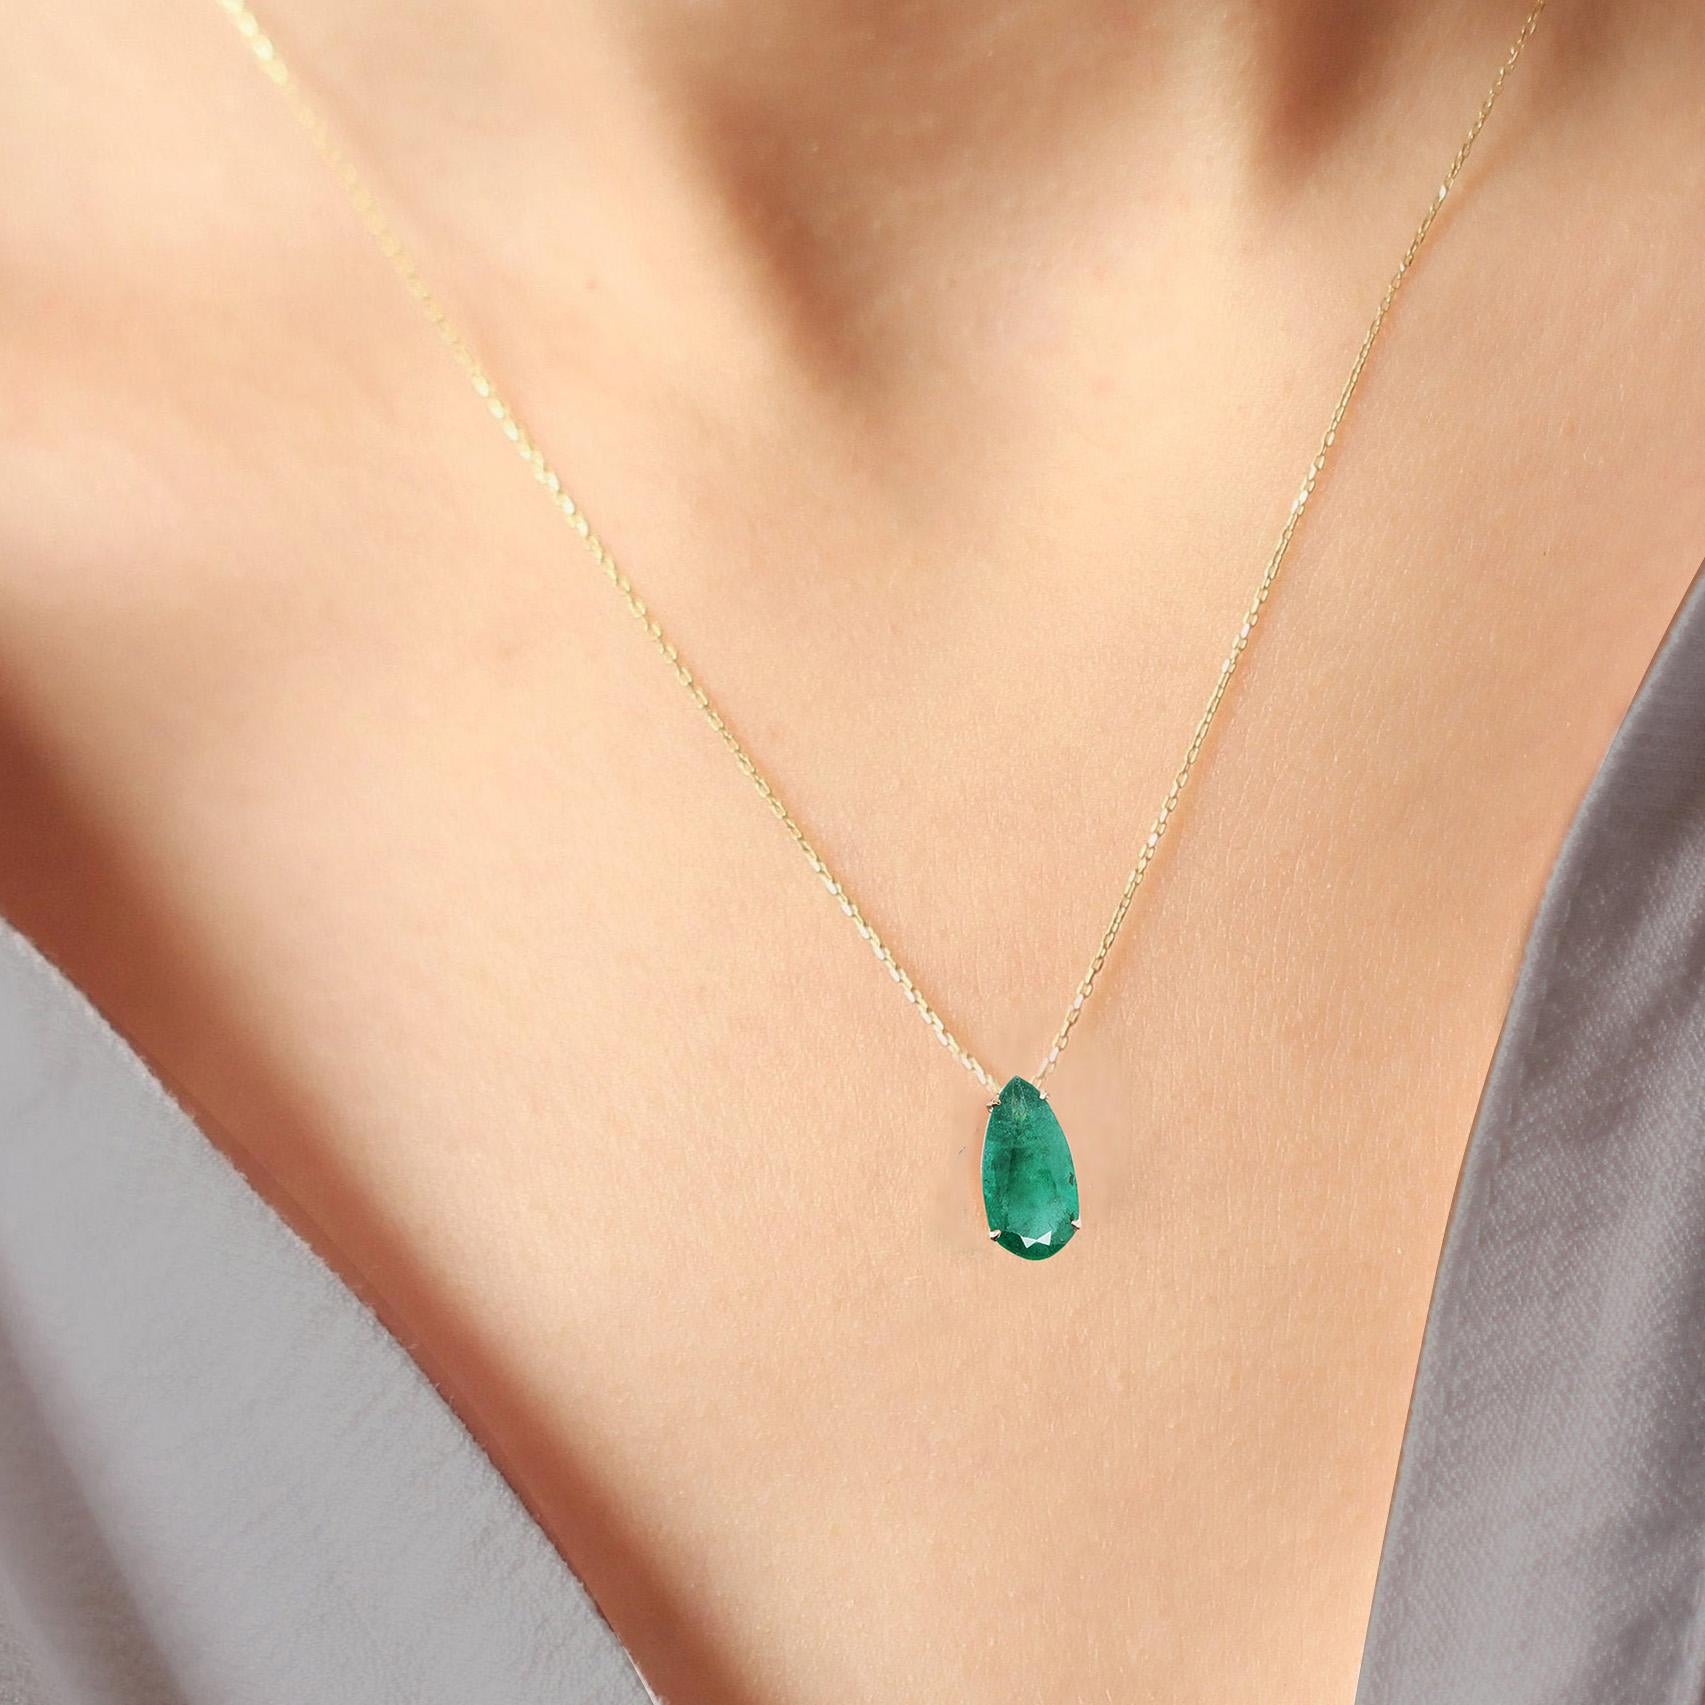 Pear Cut 18K Yellow Gold Necklace With Emerald 3.11 ct. For Sale